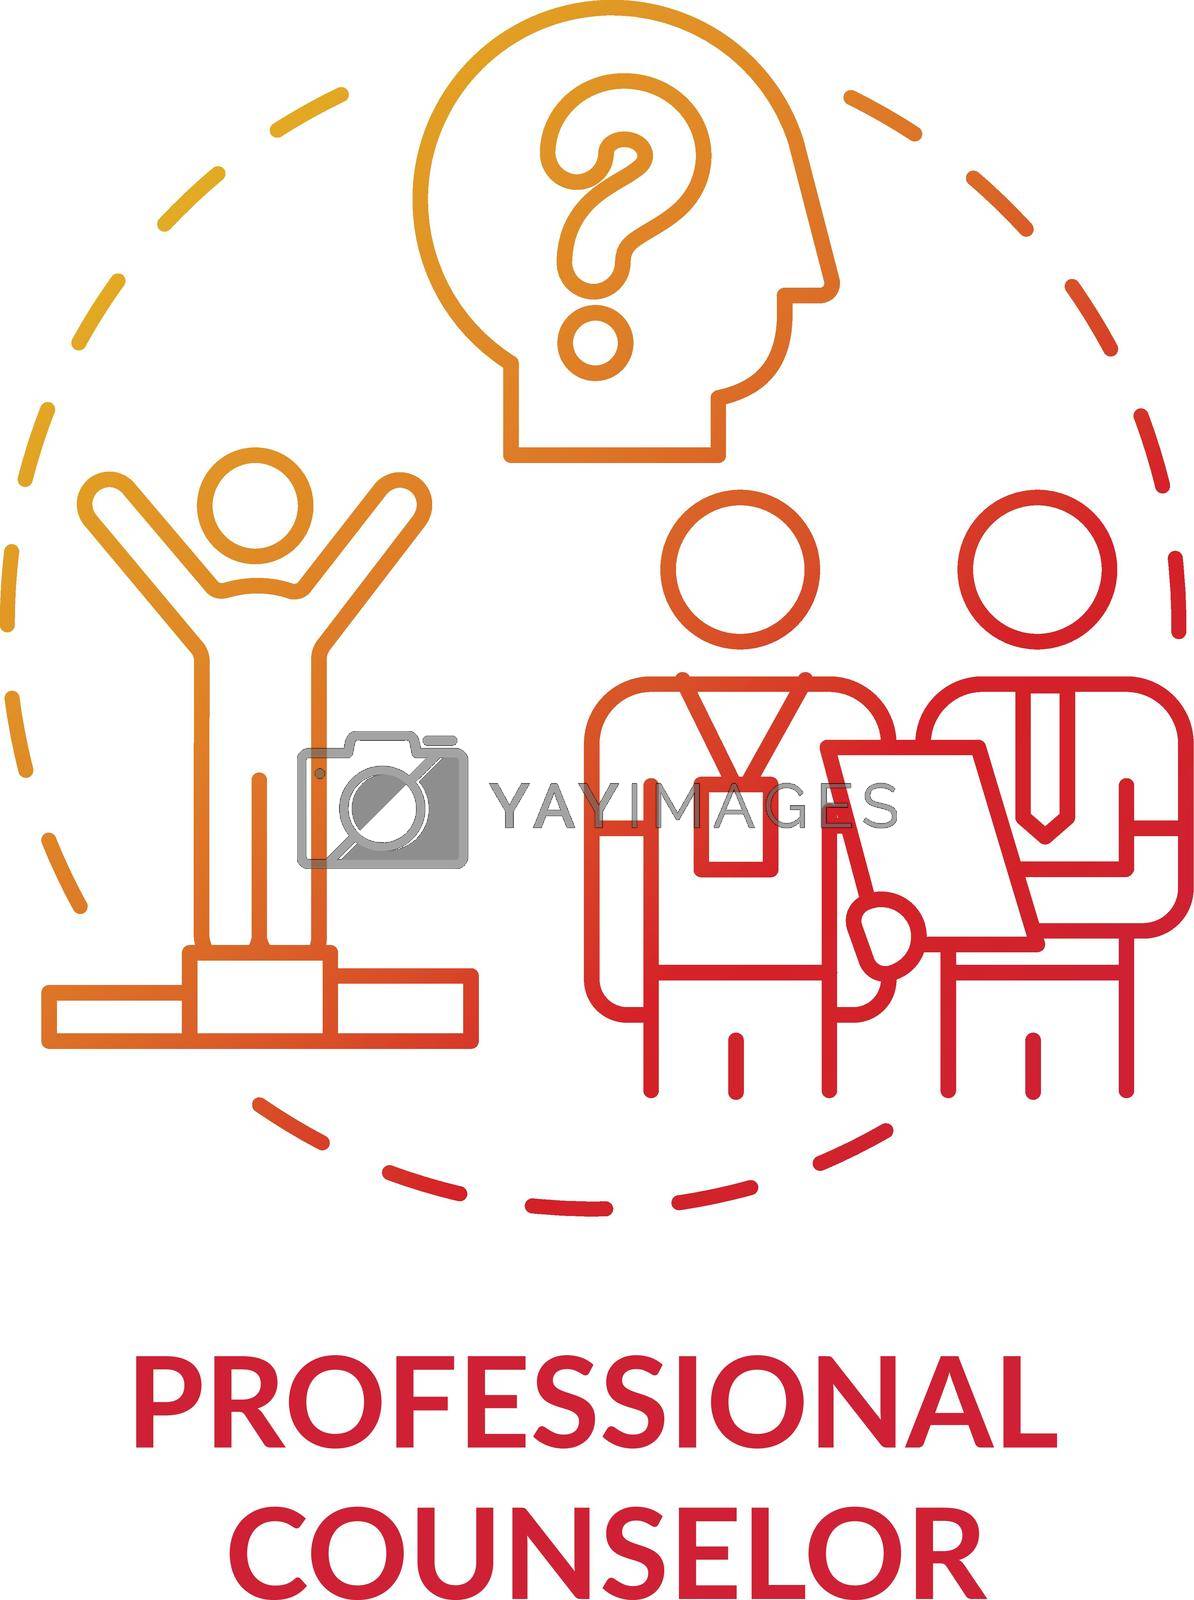 Royalty free image of Professional counselor concept icon by bsd